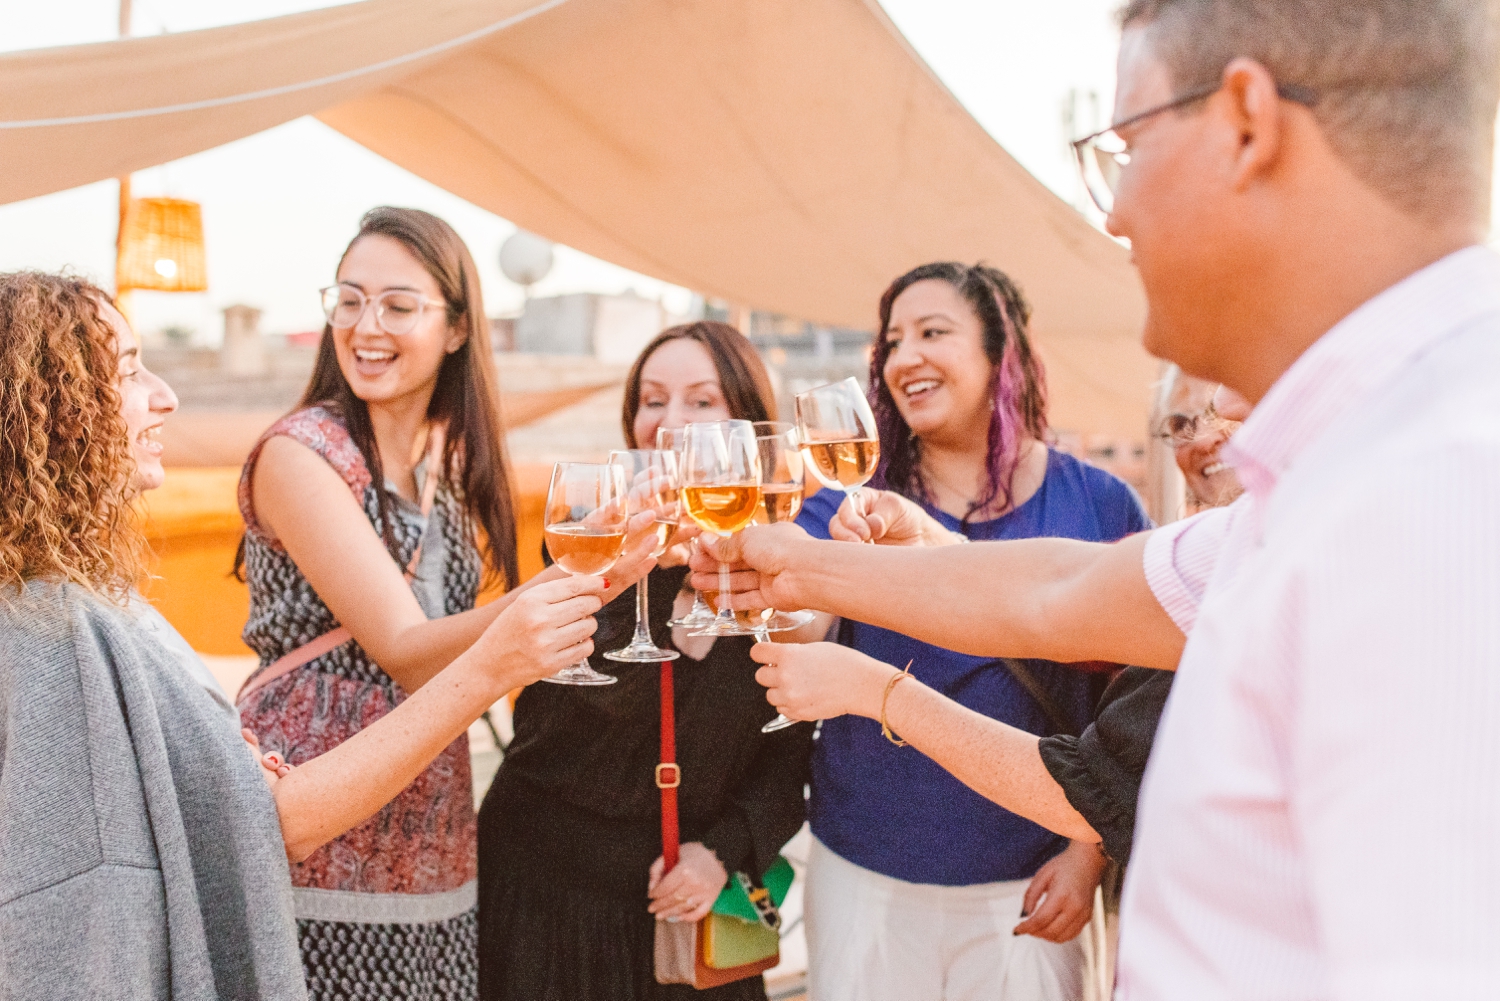 Group of women doing cheers with welcome drinks as part of group trip to Marrakesh, Morocco with travel photographer documenting moment | Brooke Michelle Photography